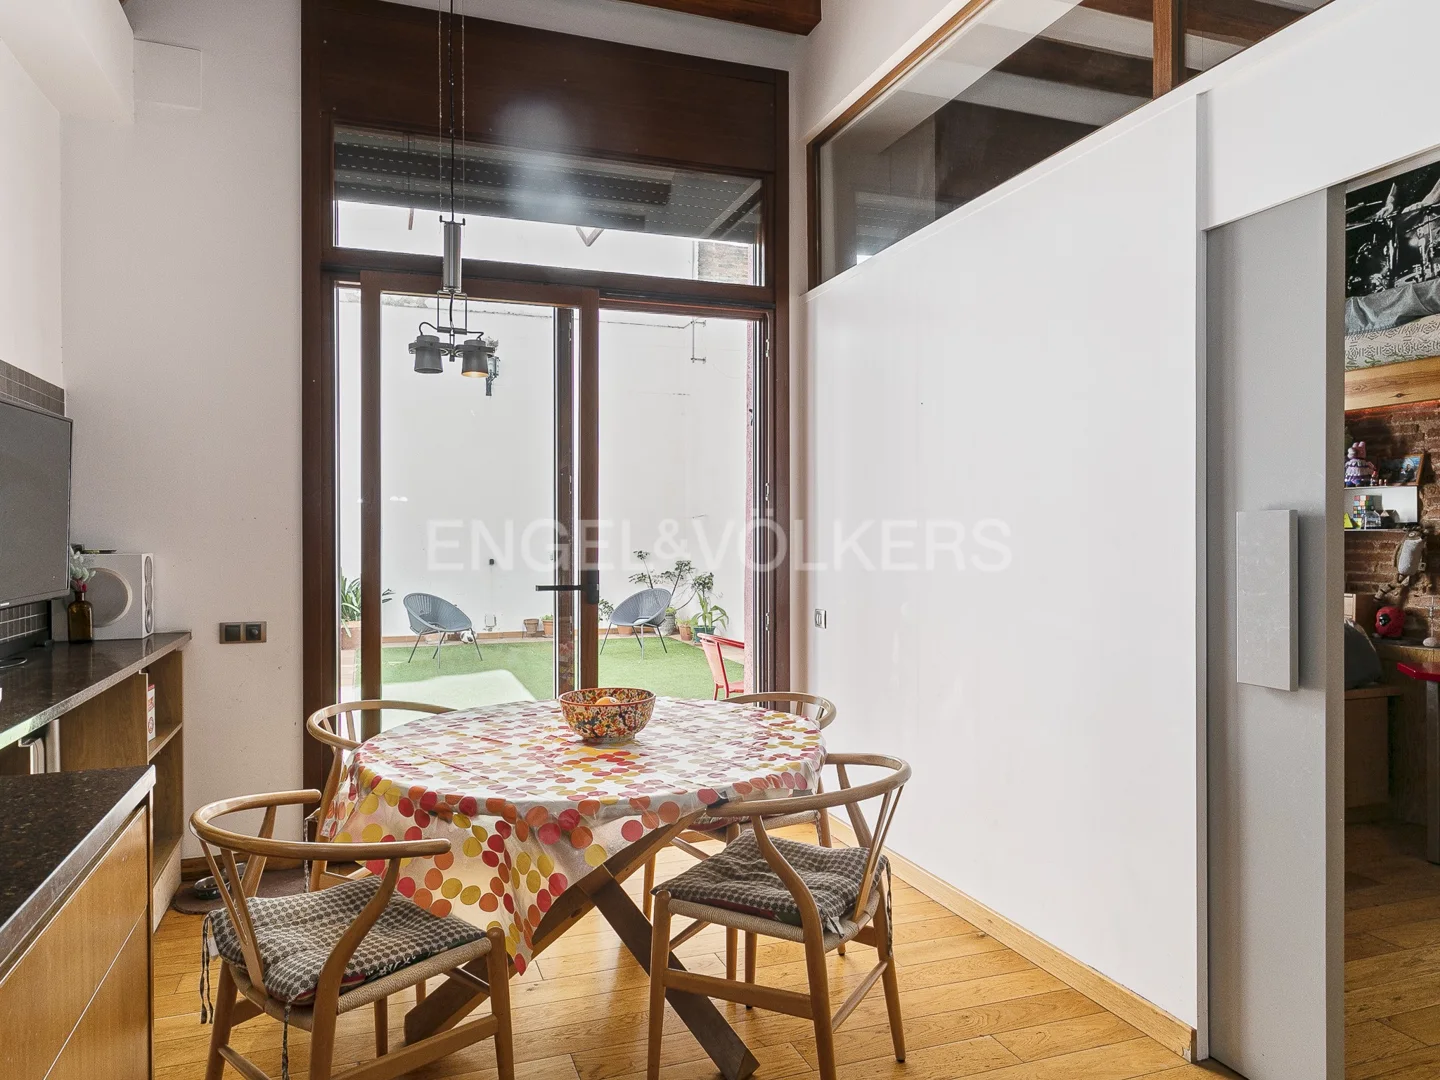 Engel & Völkers presents this exclusive apartment in the Sants district